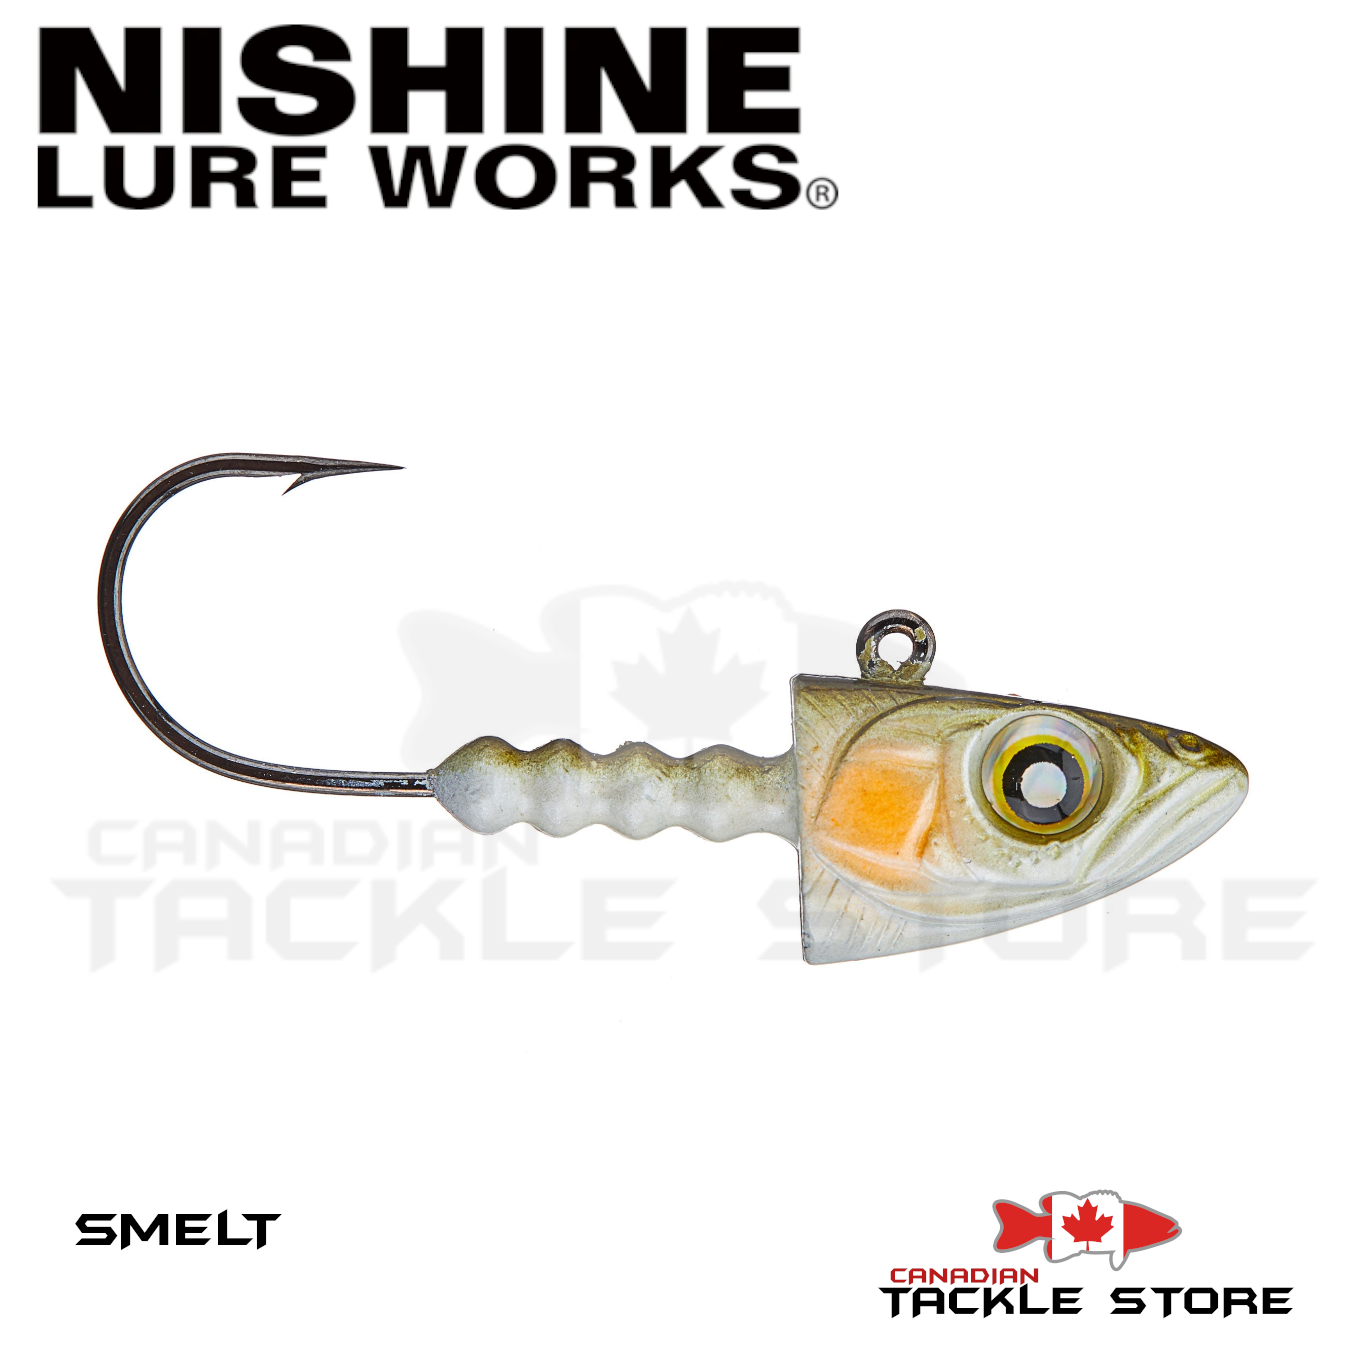 CL8 Bait, pikeshop - your online resource for pike lures